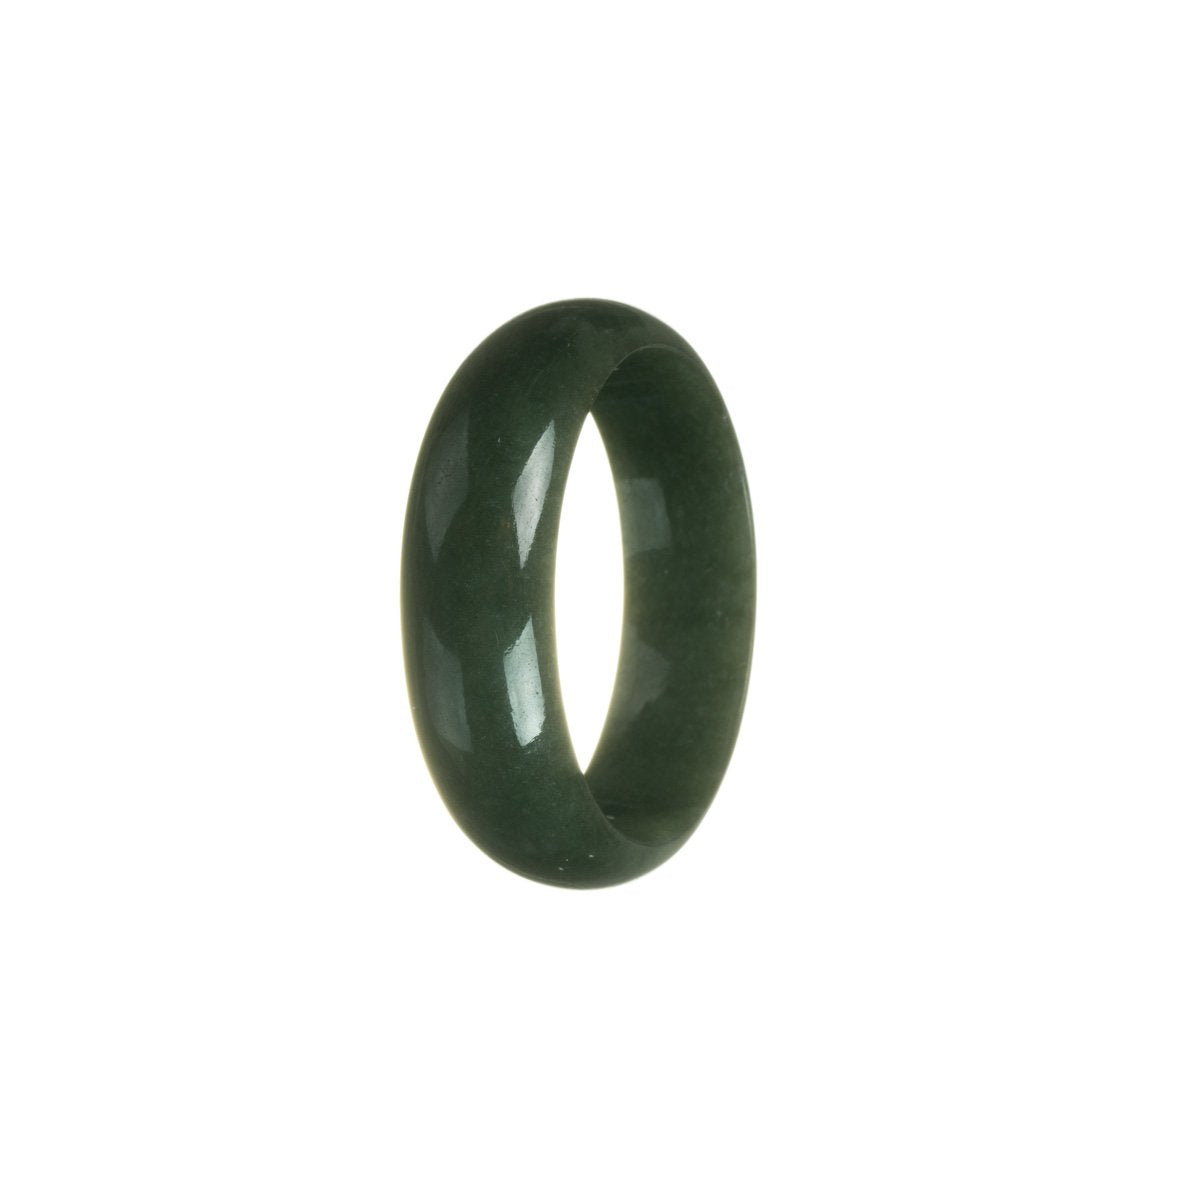 Image of a small, half-moon shaped jade bangle bracelet for children. The bracelet is made of genuine Grade A green Burma jade, showcasing its natural beauty. Perfect for adding a touch of elegance to any outfit.